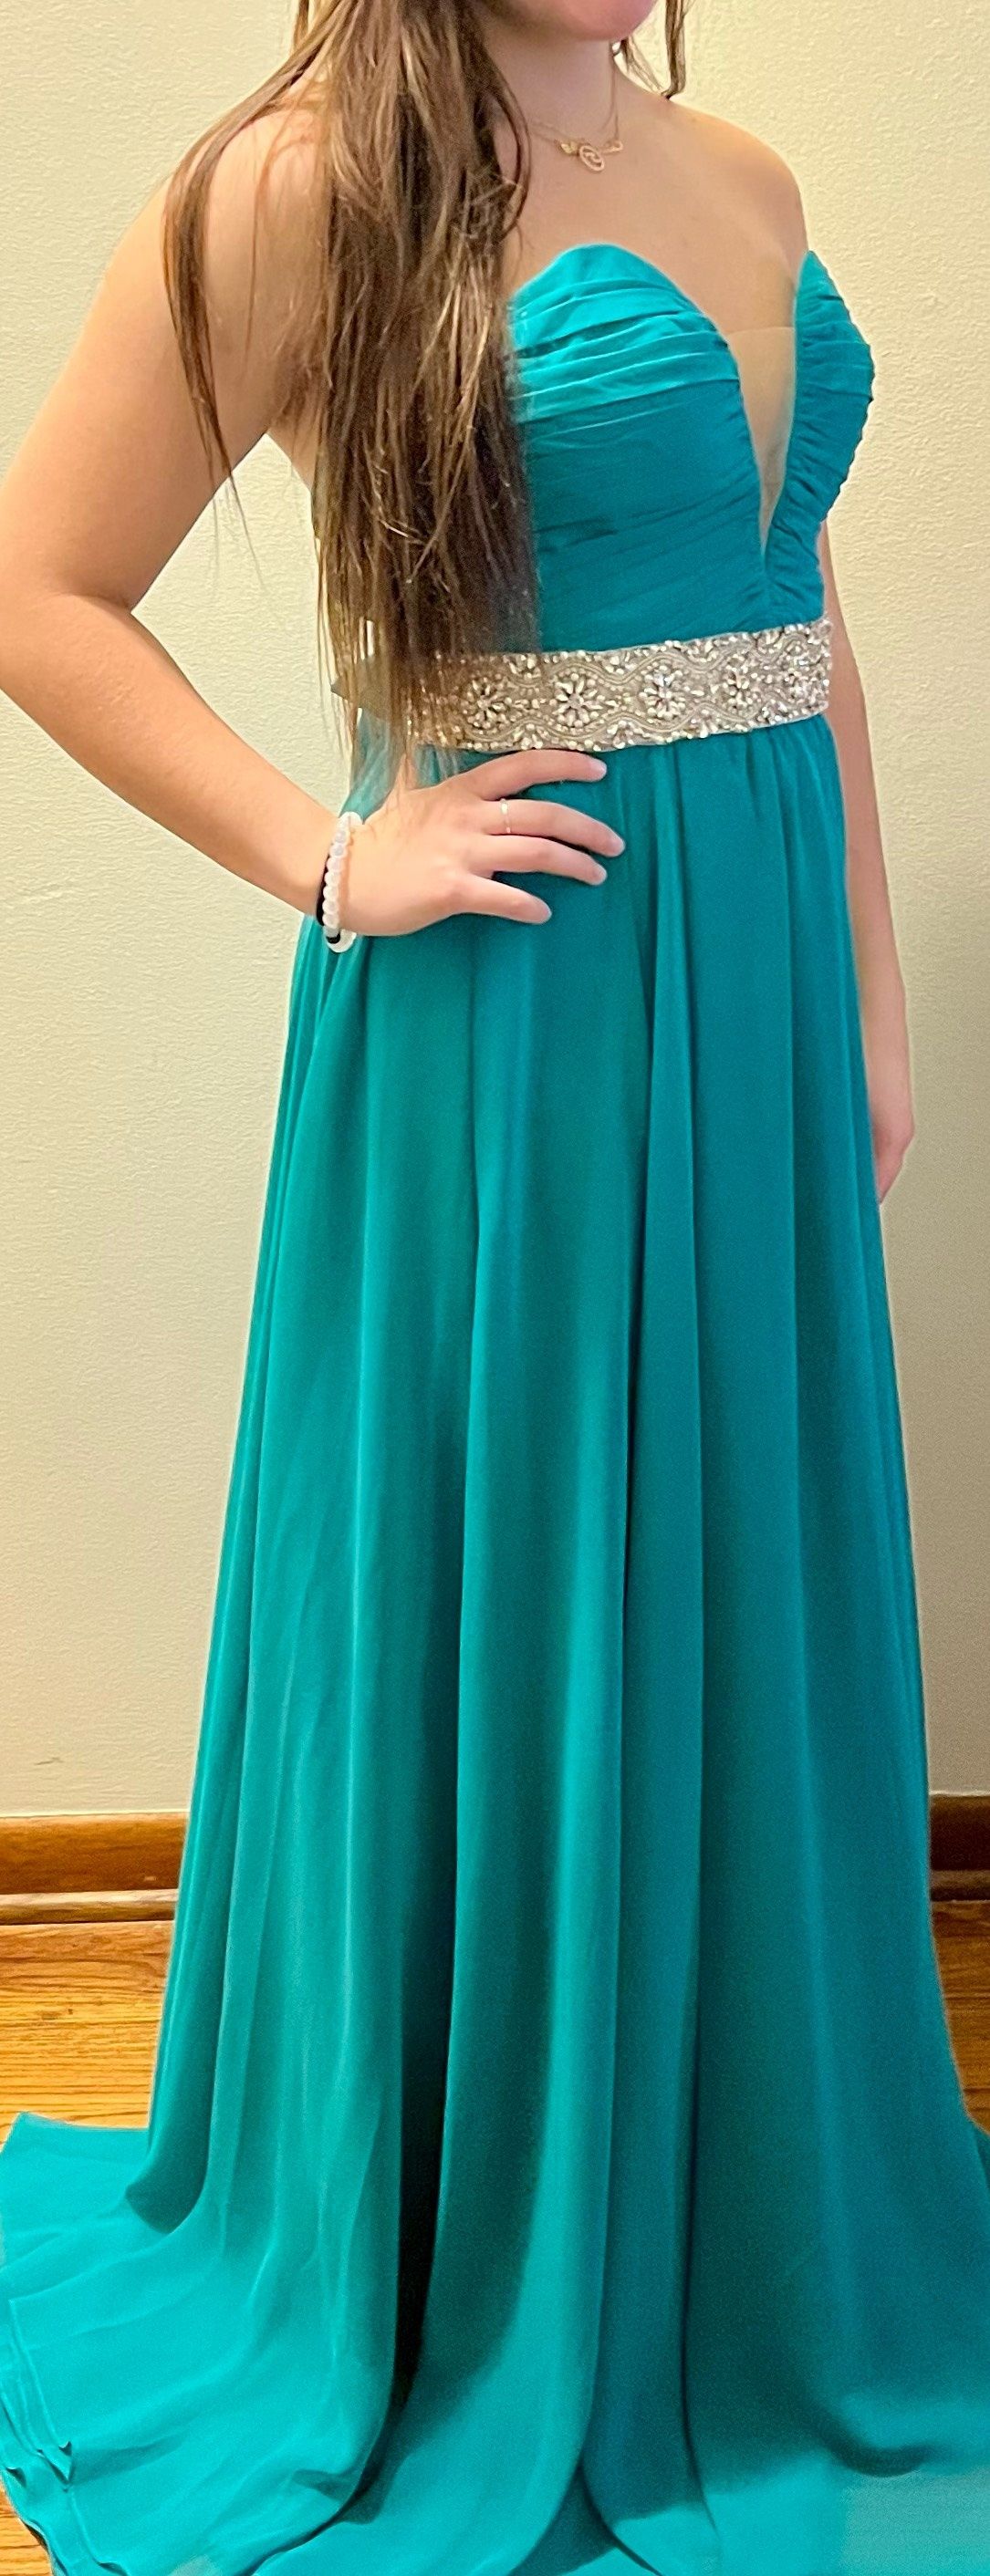 Faviana Size 2 Prom Halter Green A-line Dress on Queenly